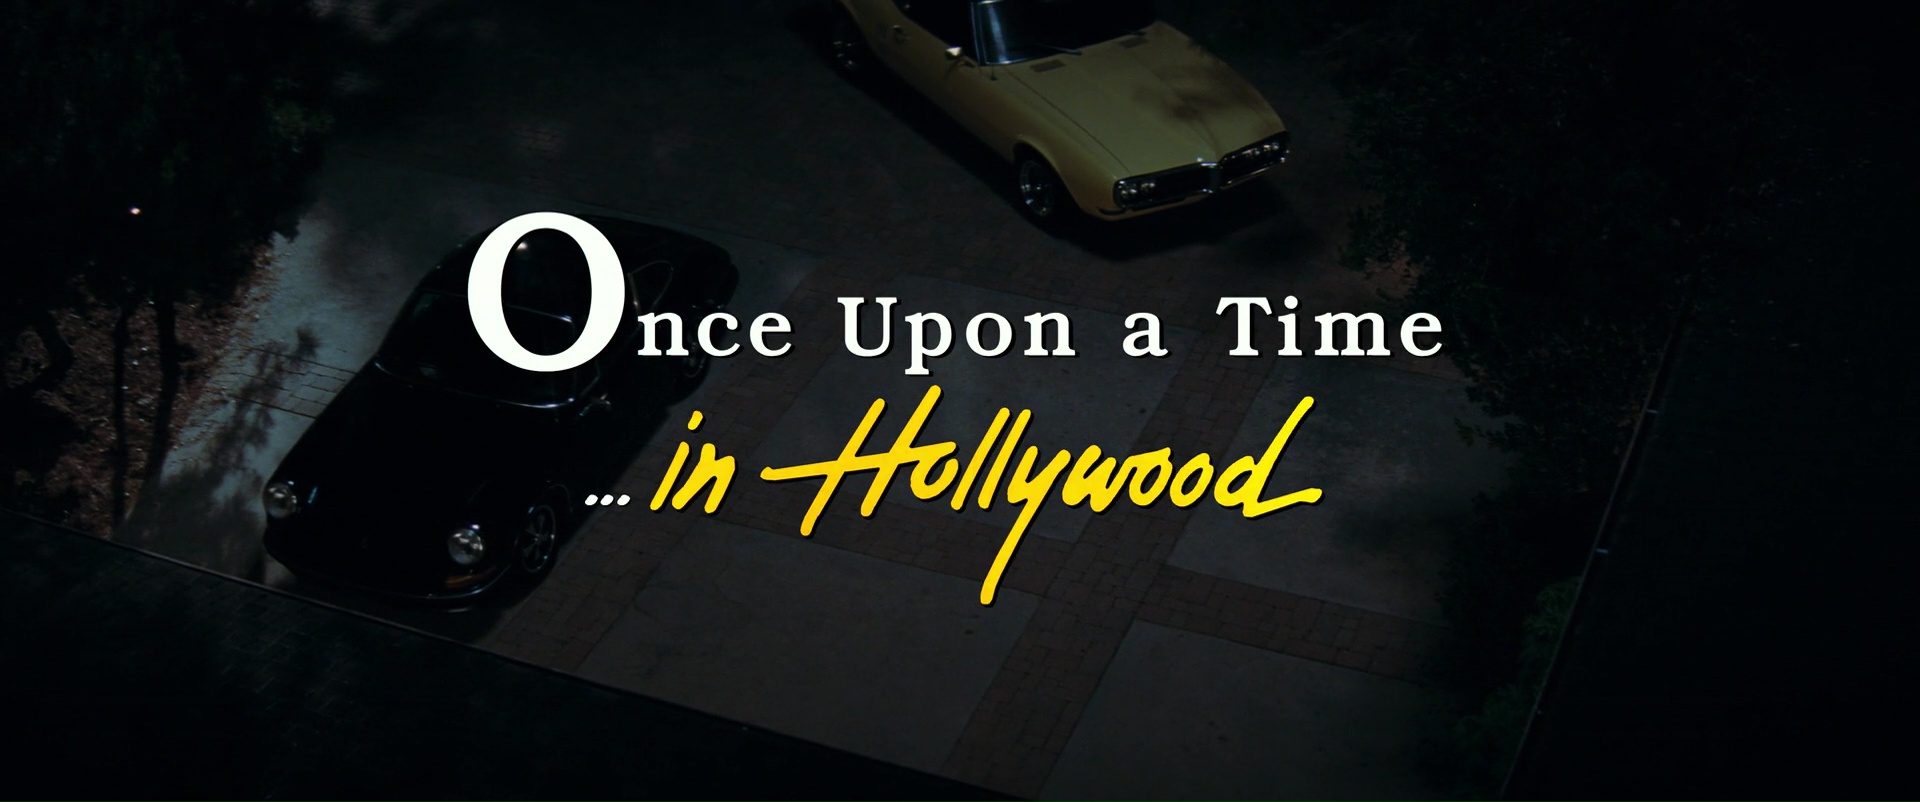 ONCE UPON A TIME IN HOLLYWOOD de Quentin Tarantino (2019)